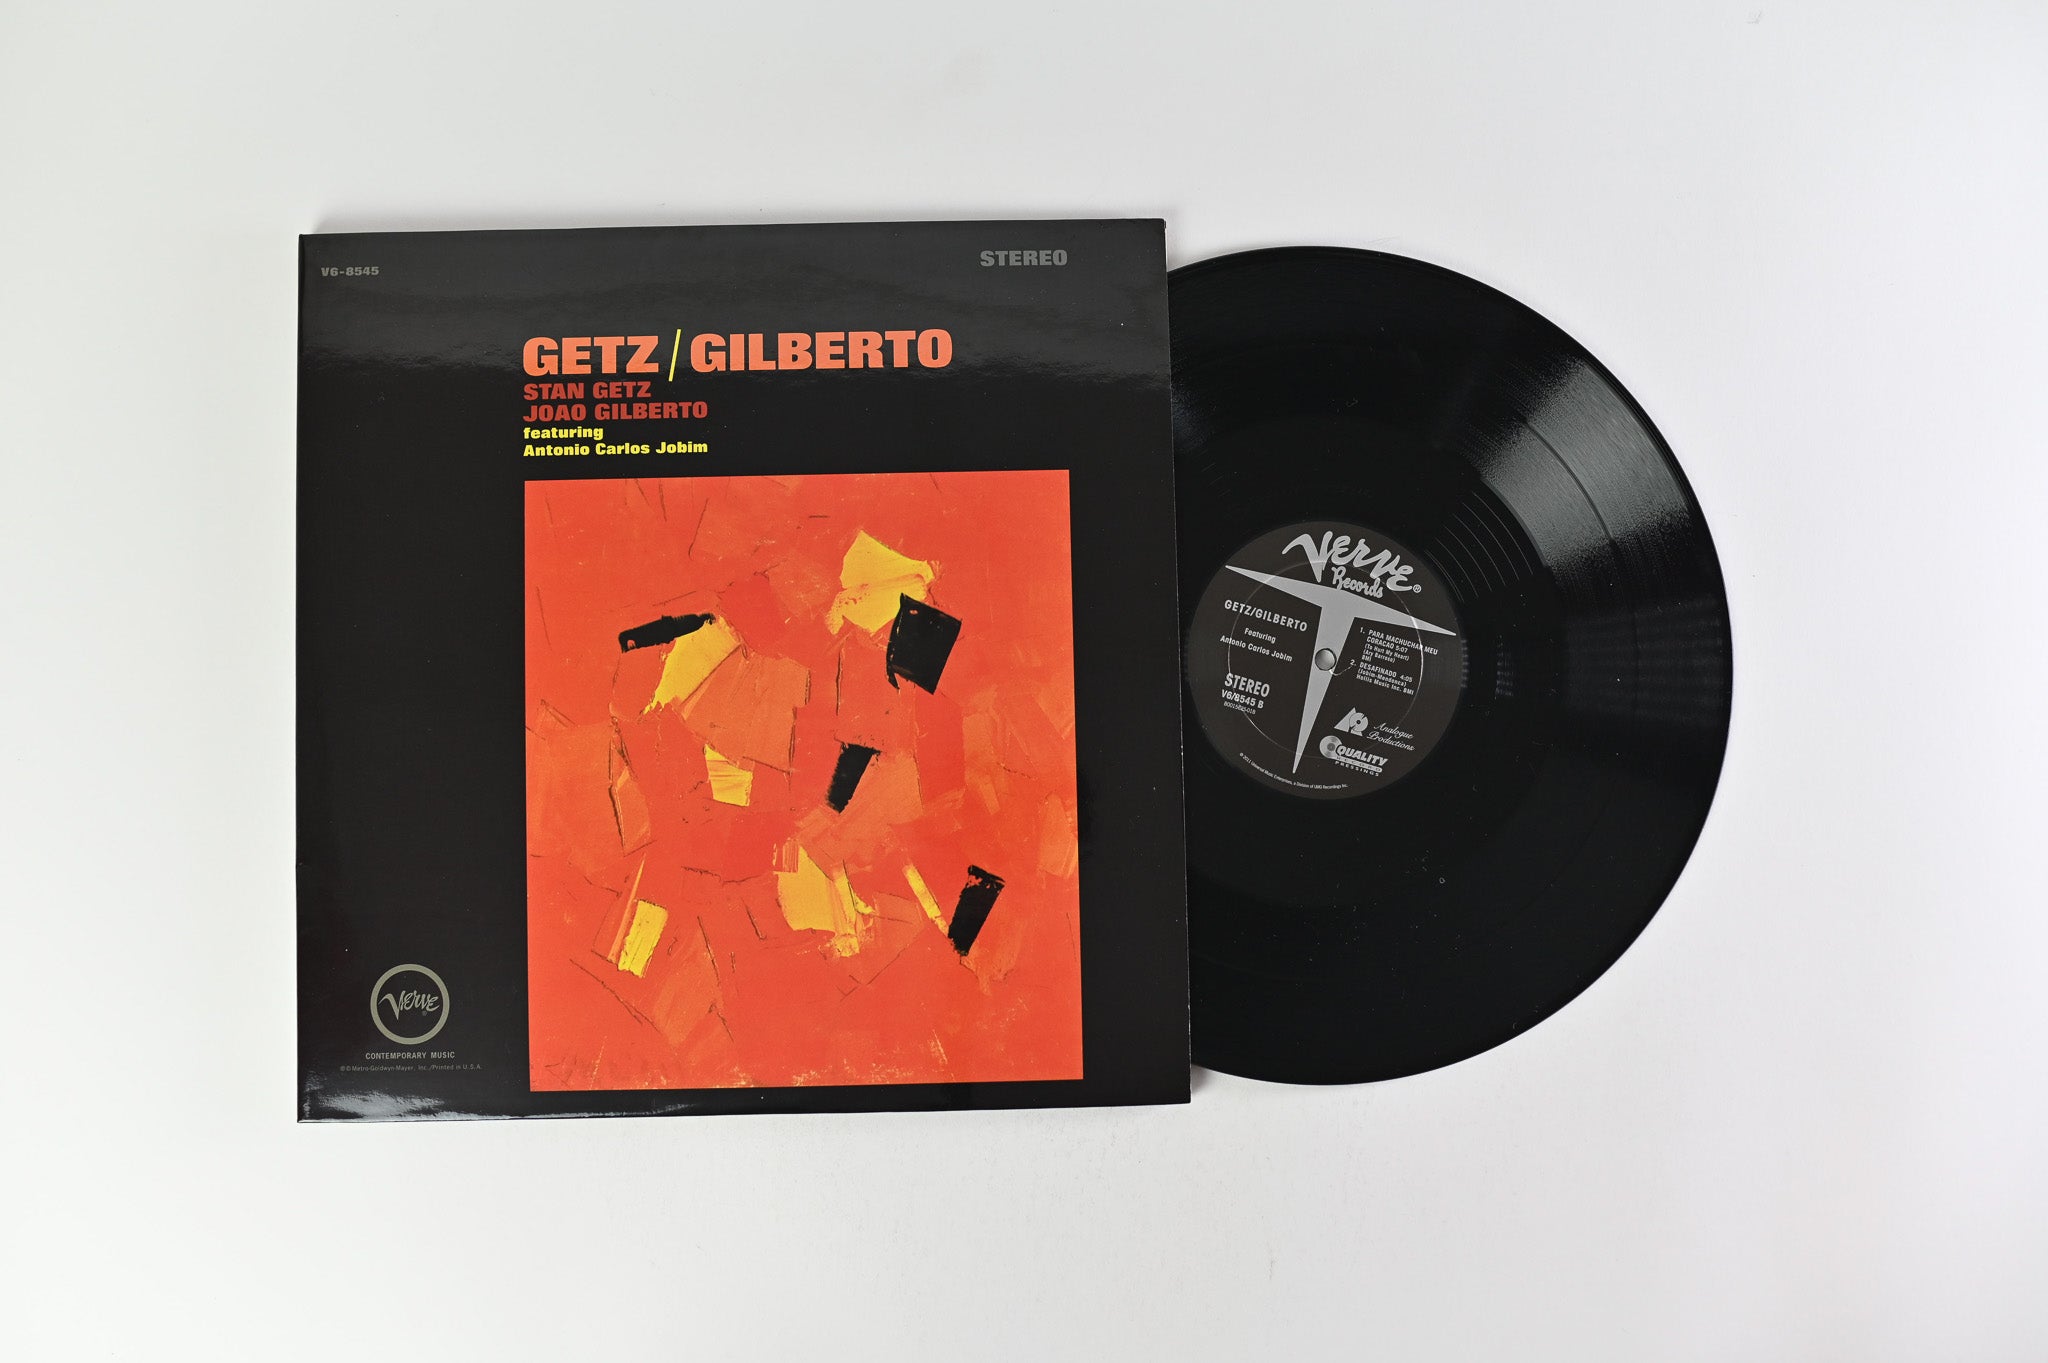 Stan Getz - Getz / Gilberto Reissue on Analogue Productions 45 RPM